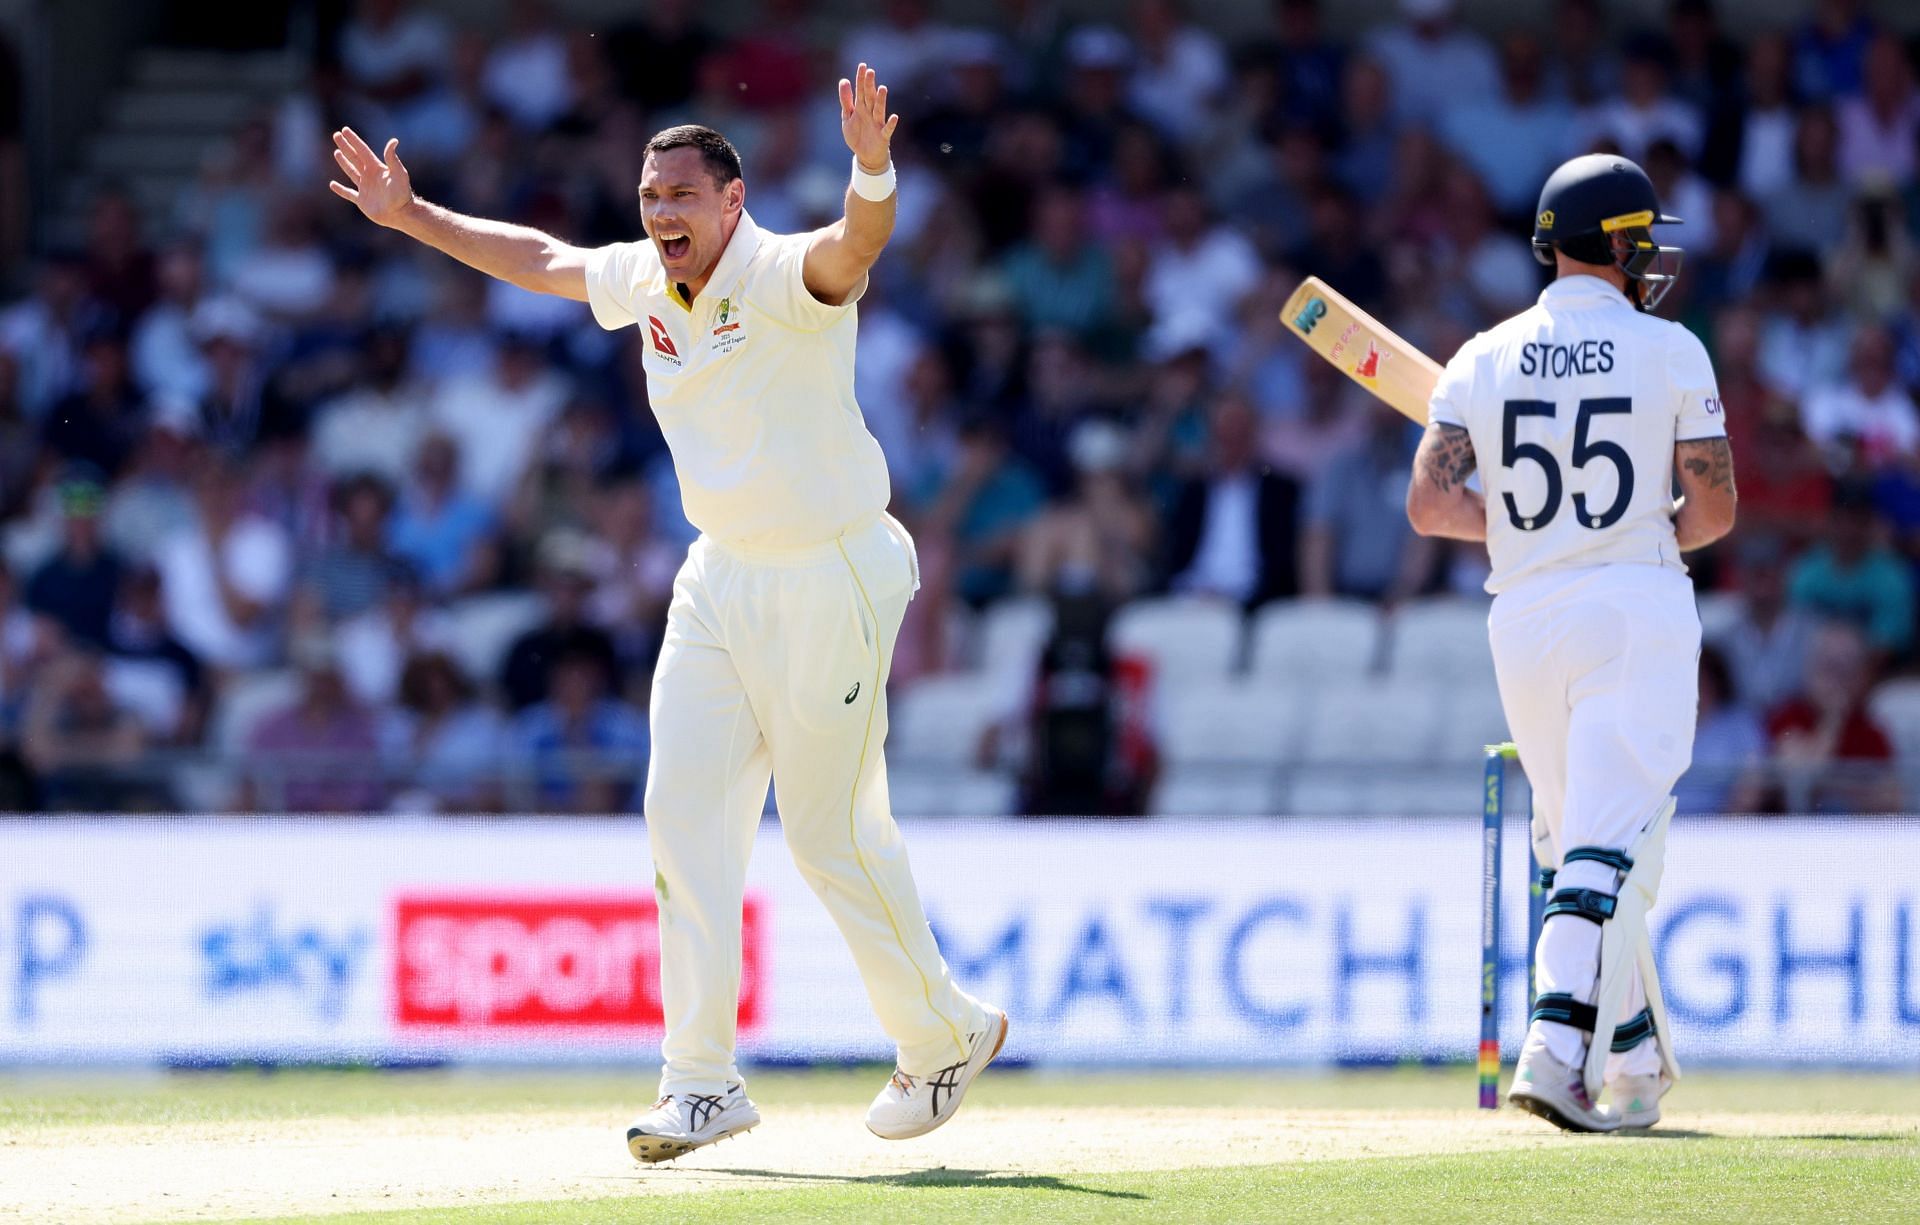 Scott Boland will be keen to make a mark on Day 4 at Headingley. (Pic: Getty Images)